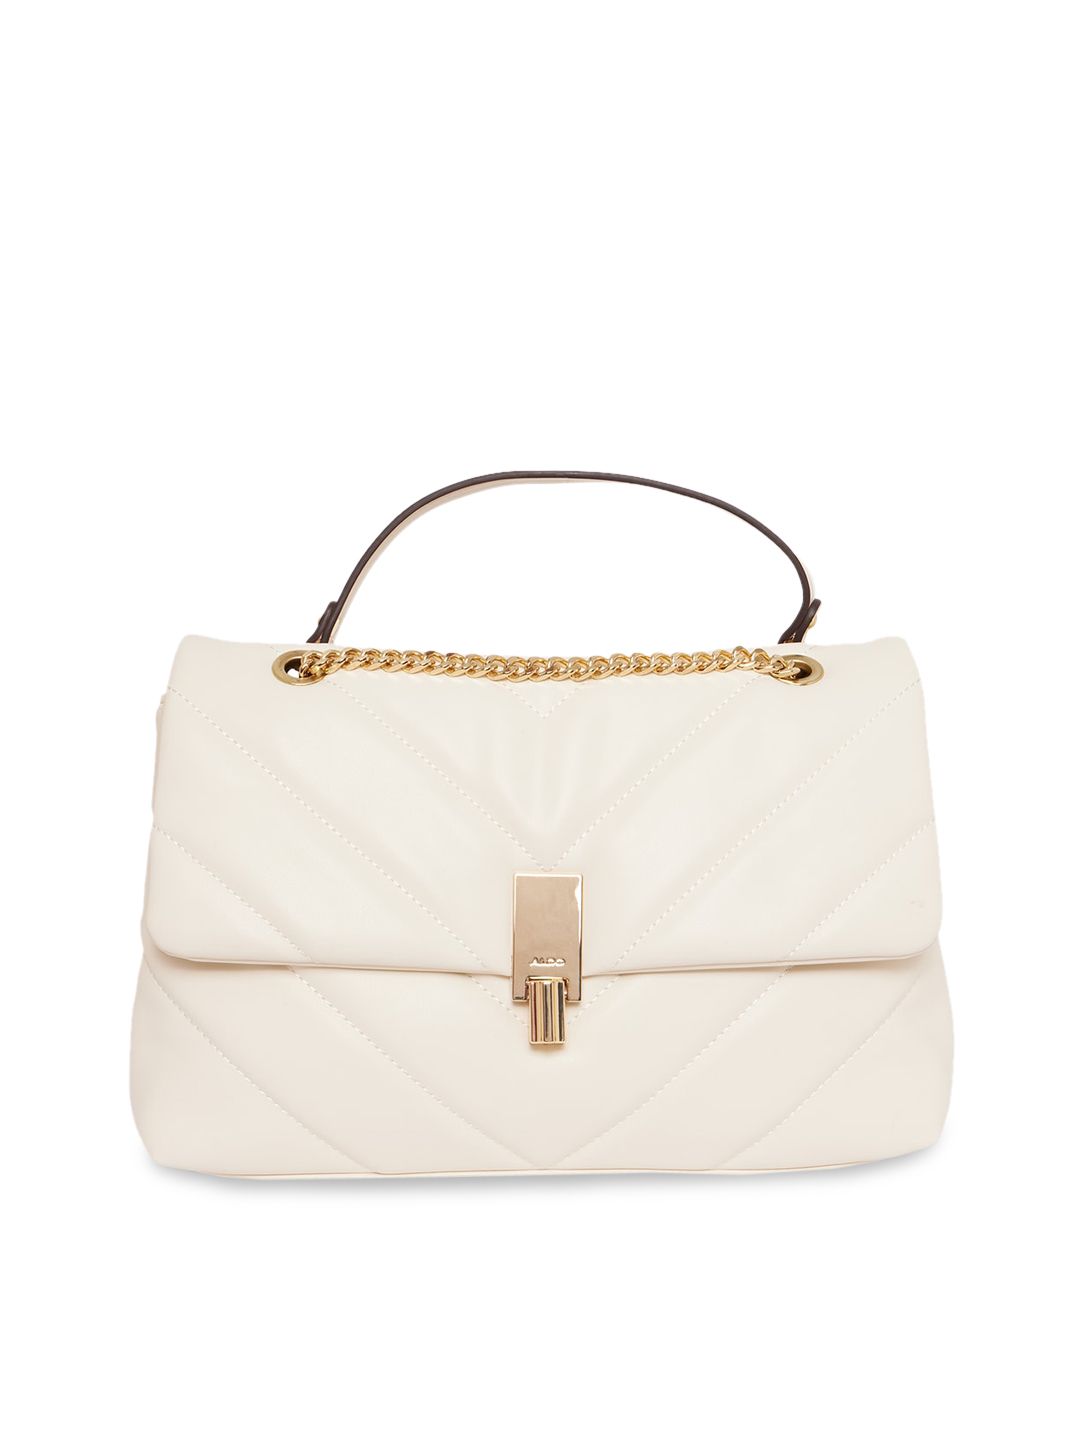 ALDO Beige PU Structured Handheld Bag with Quilted Price in India